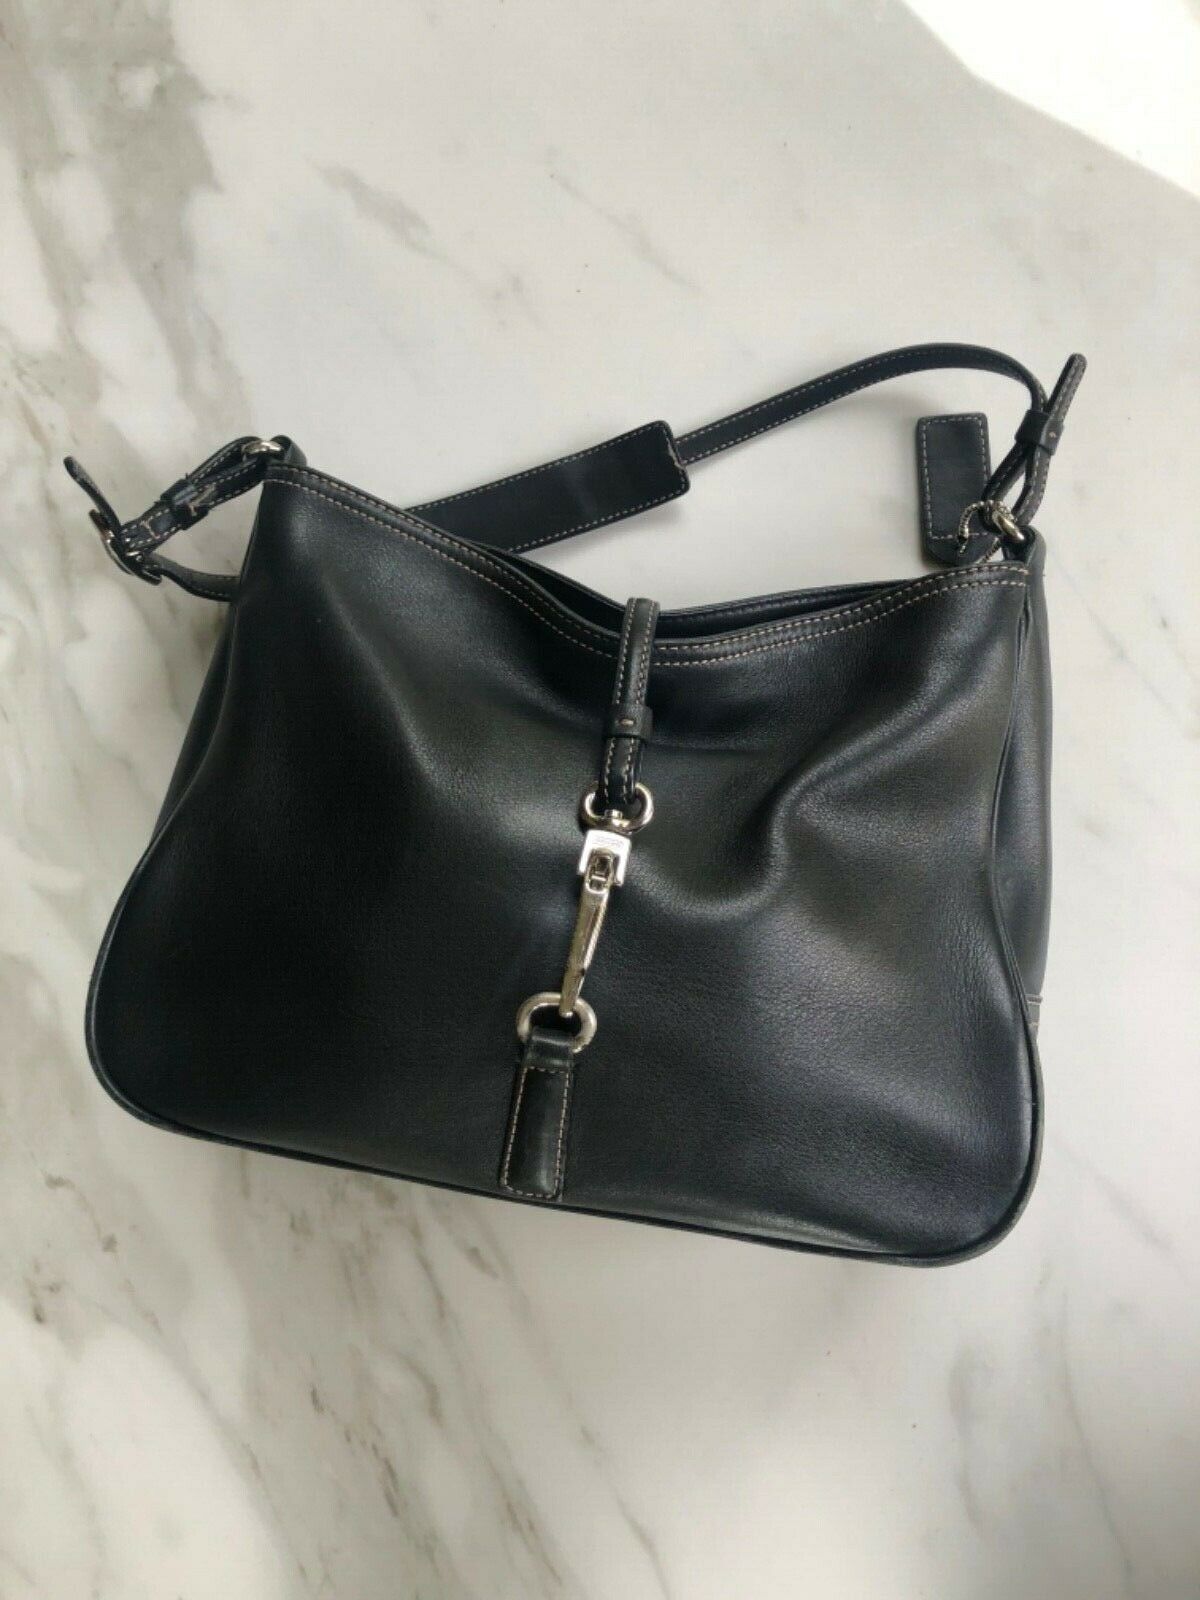 Help Choosing! Prada Shoulder Hobo Bag or YSL Le 5 a 7 Small Supple Shoulder  Bag. Looking for an every day bag to hold basic essentials and make a  statement. : r/handbags